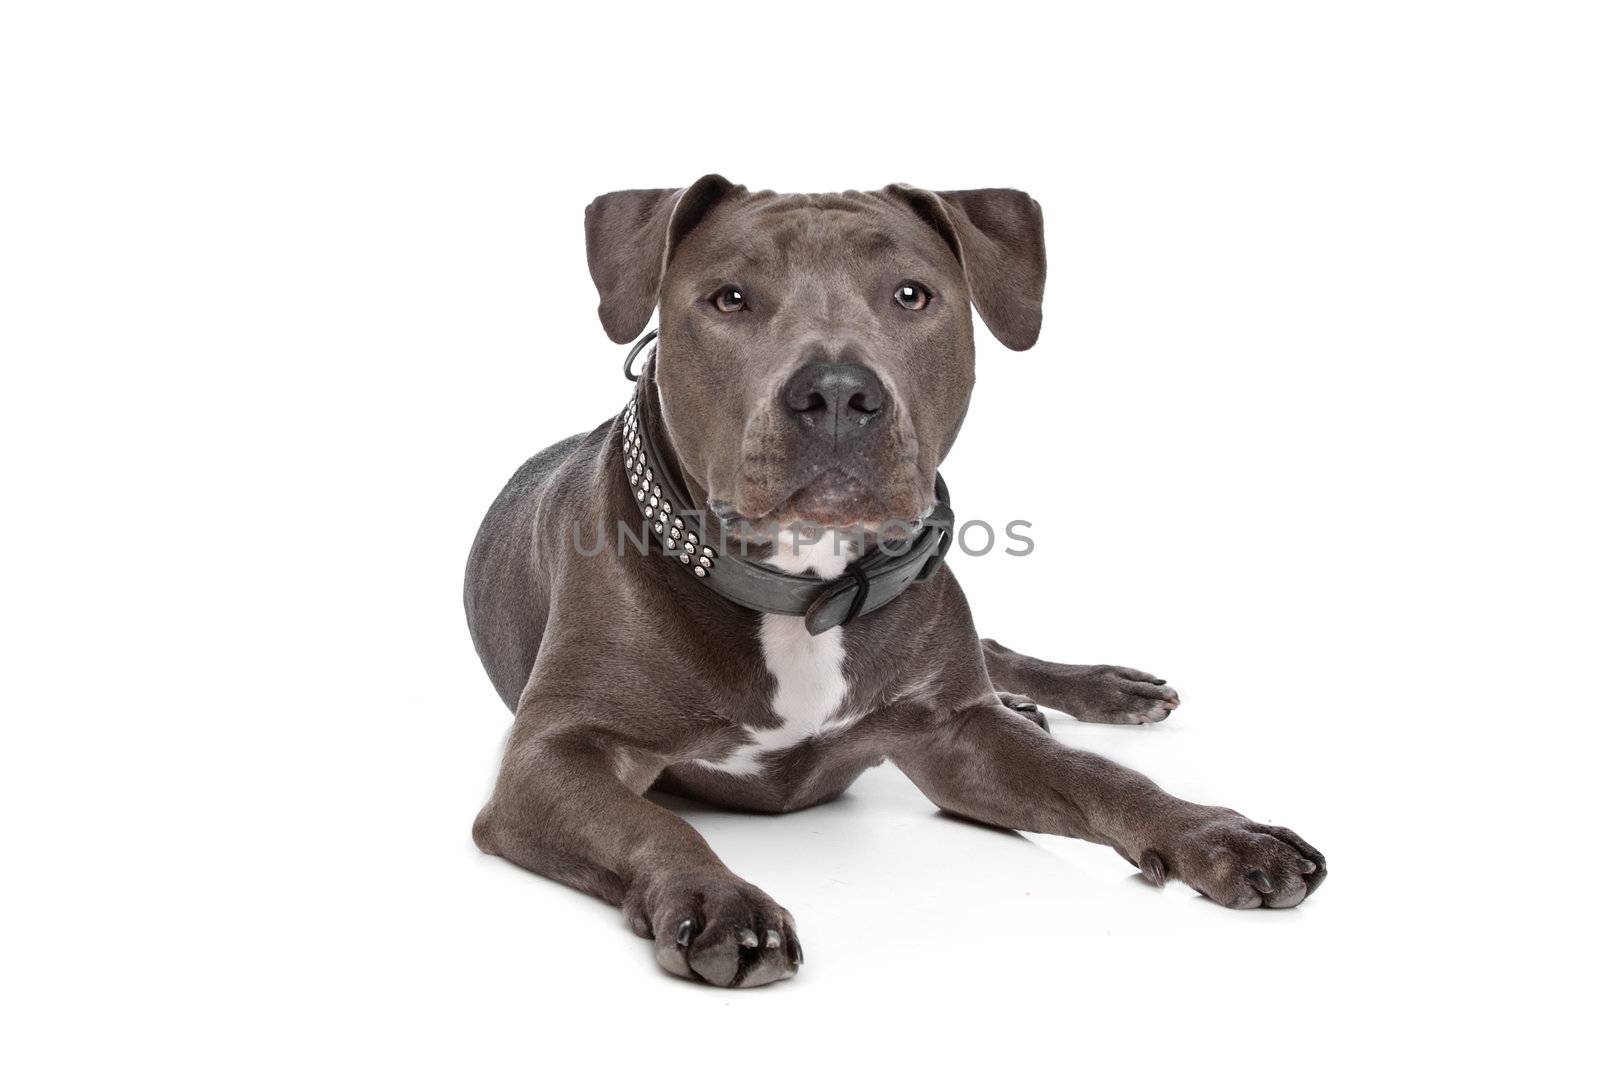 American staffordshire terrier by eriklam